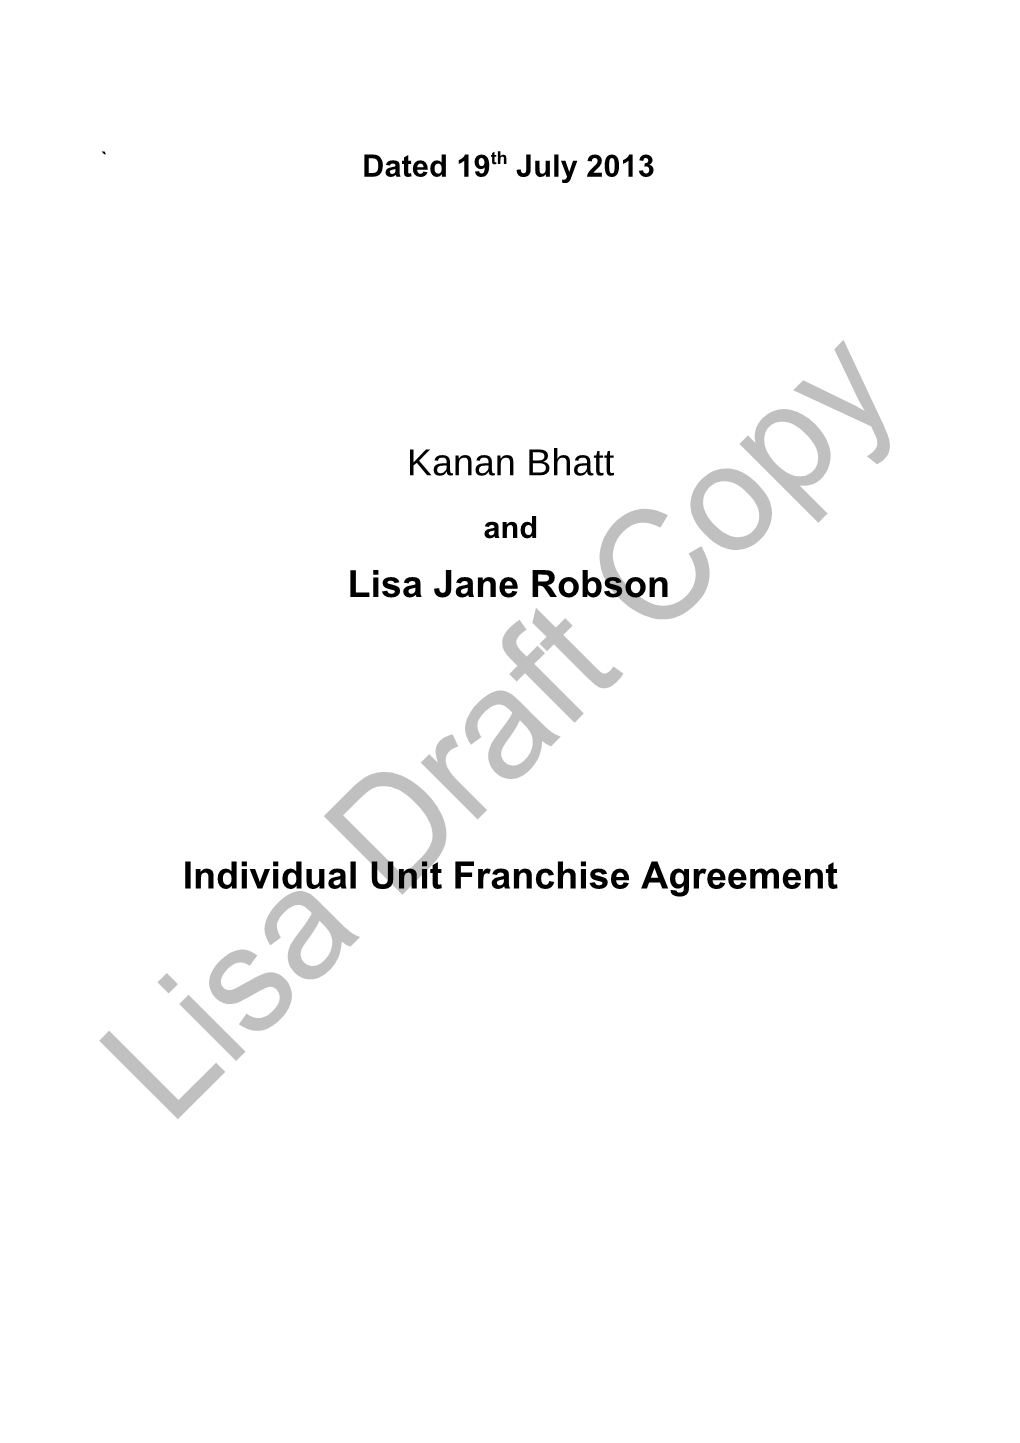 2Franchise Rights and Term